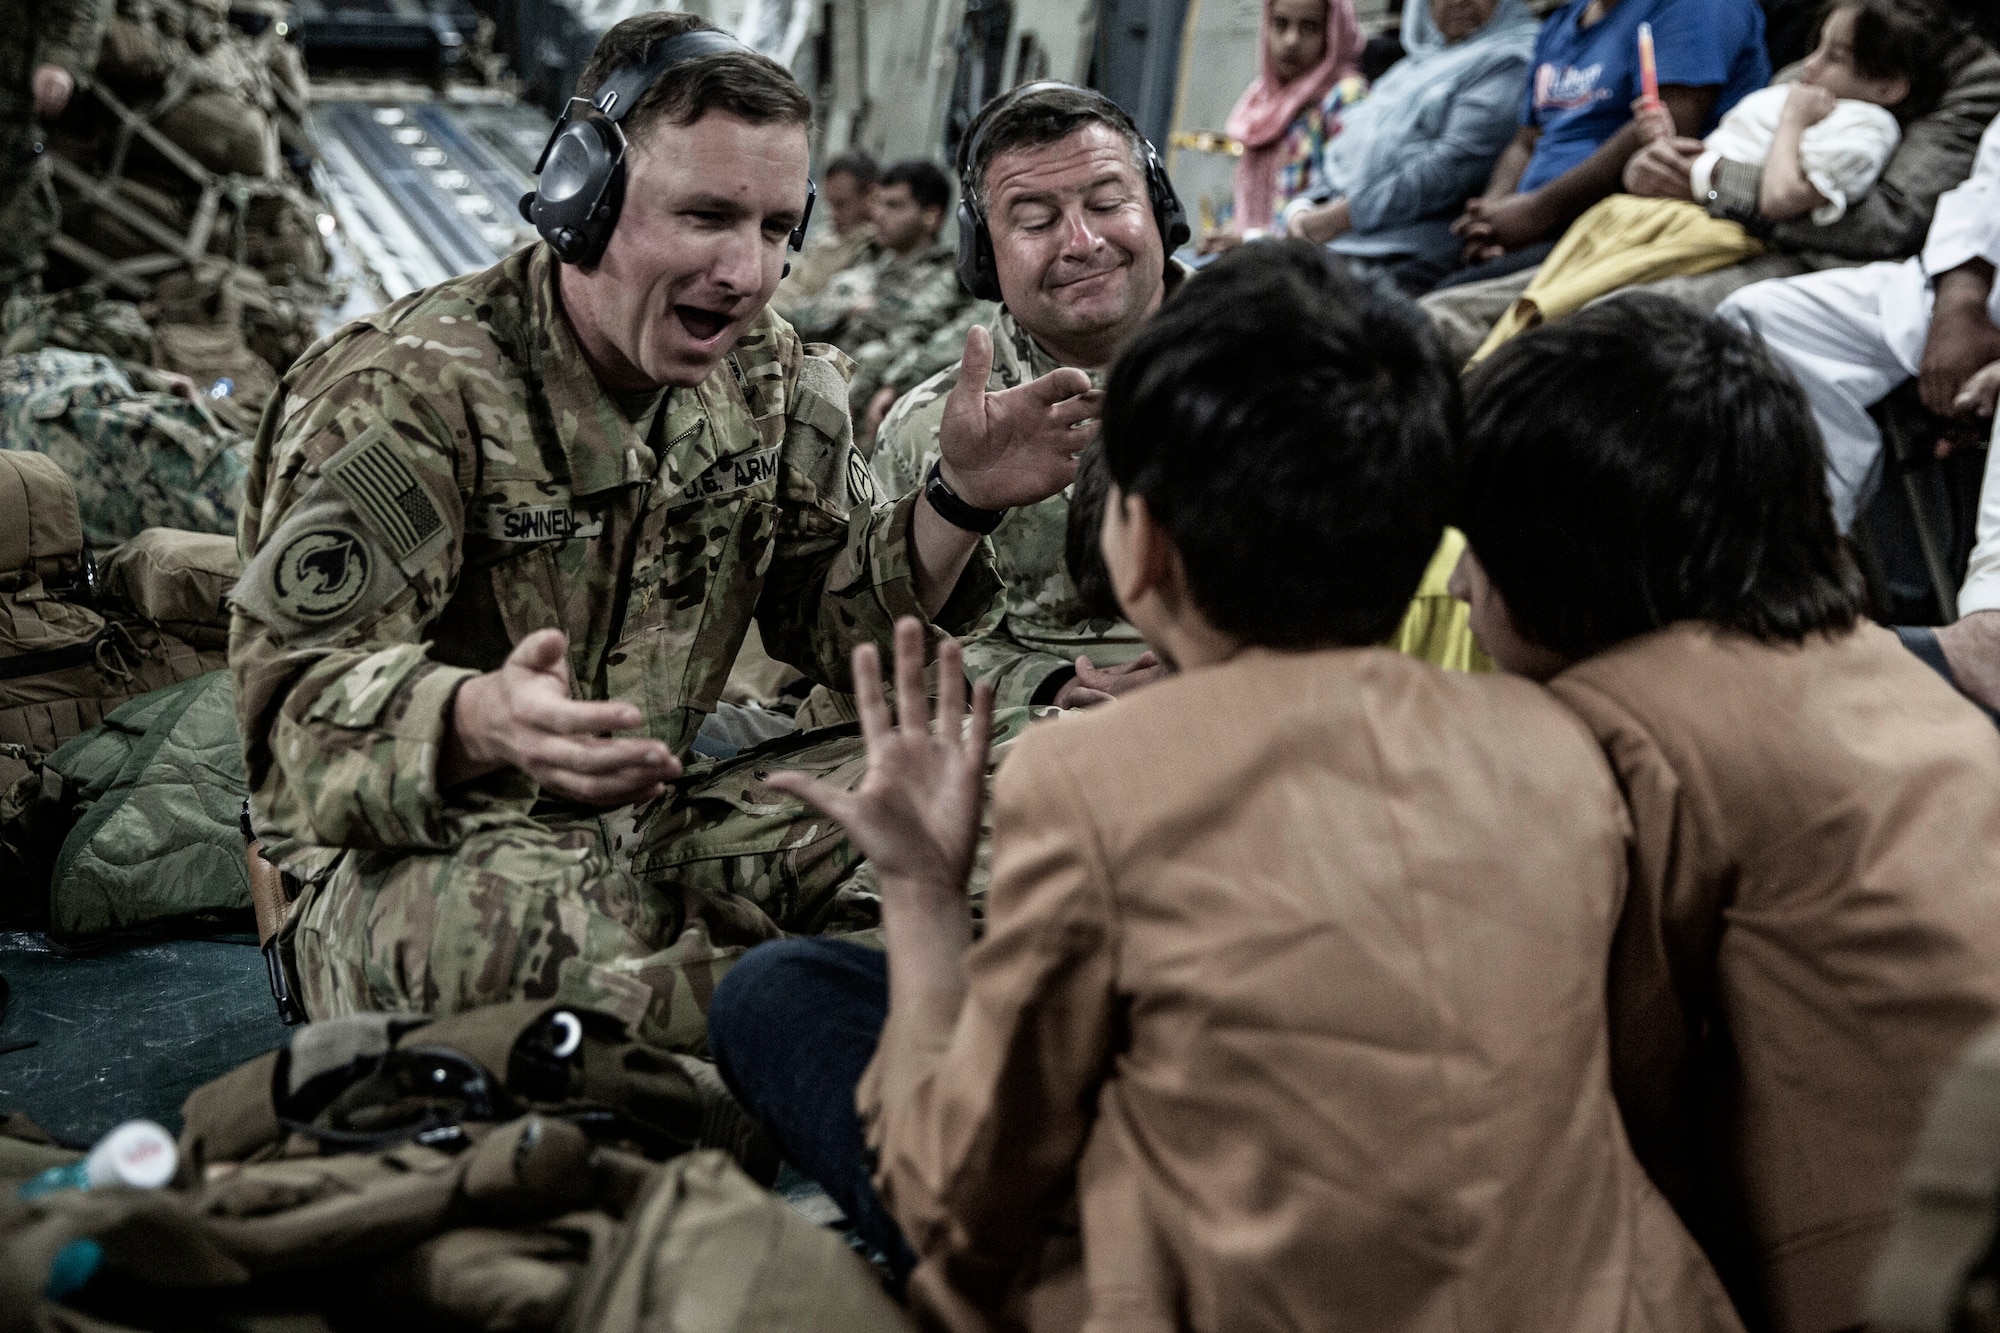 A soldier smiles and gesticulates while sitting on an aircraft floor with two youths.